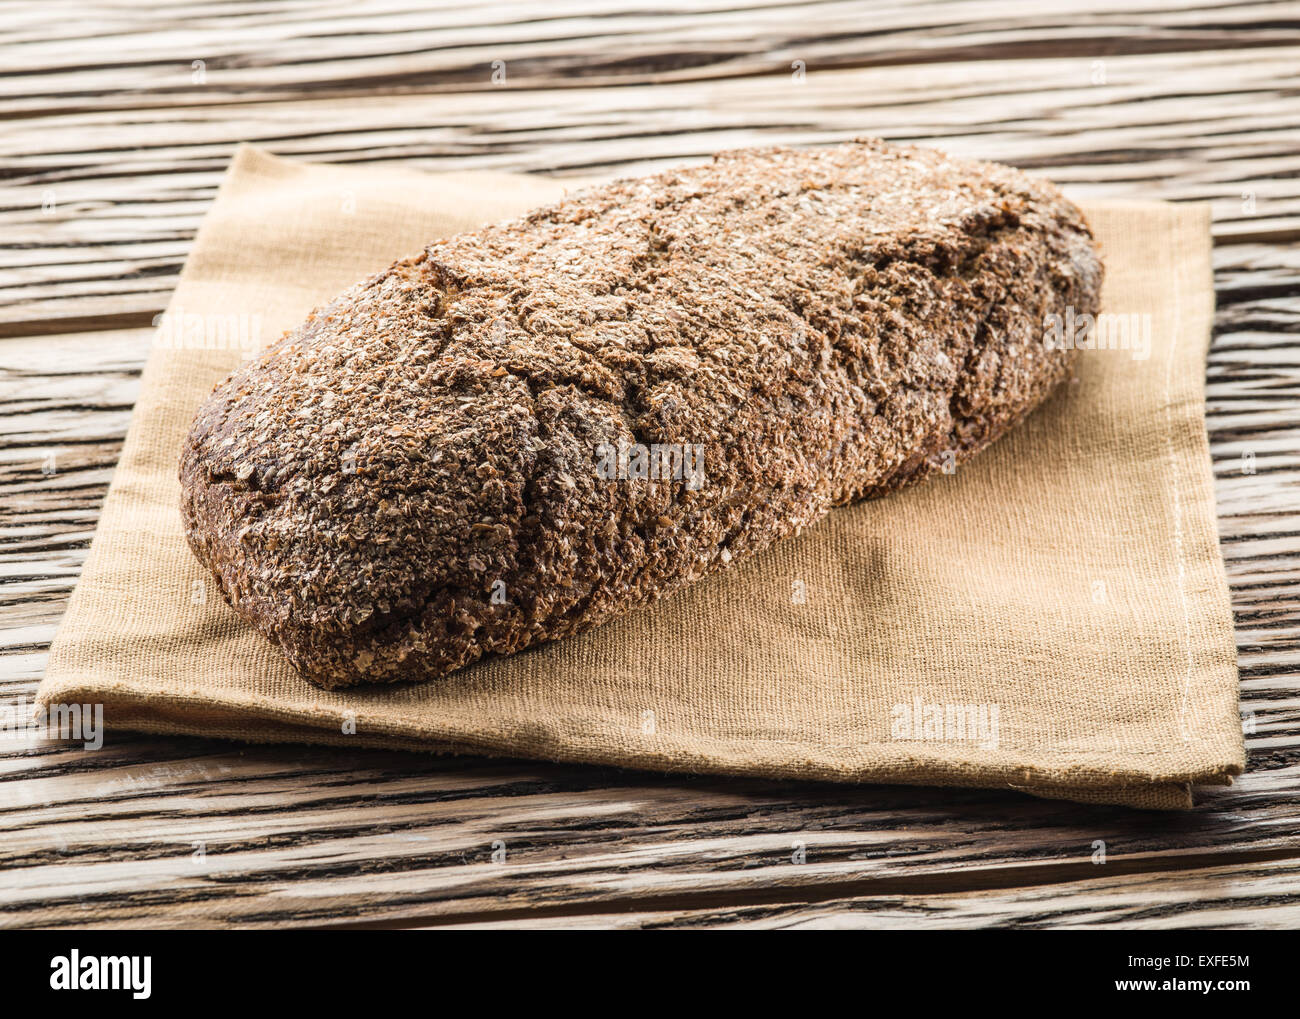 Long loaf on the wooden plank. Stock Photo